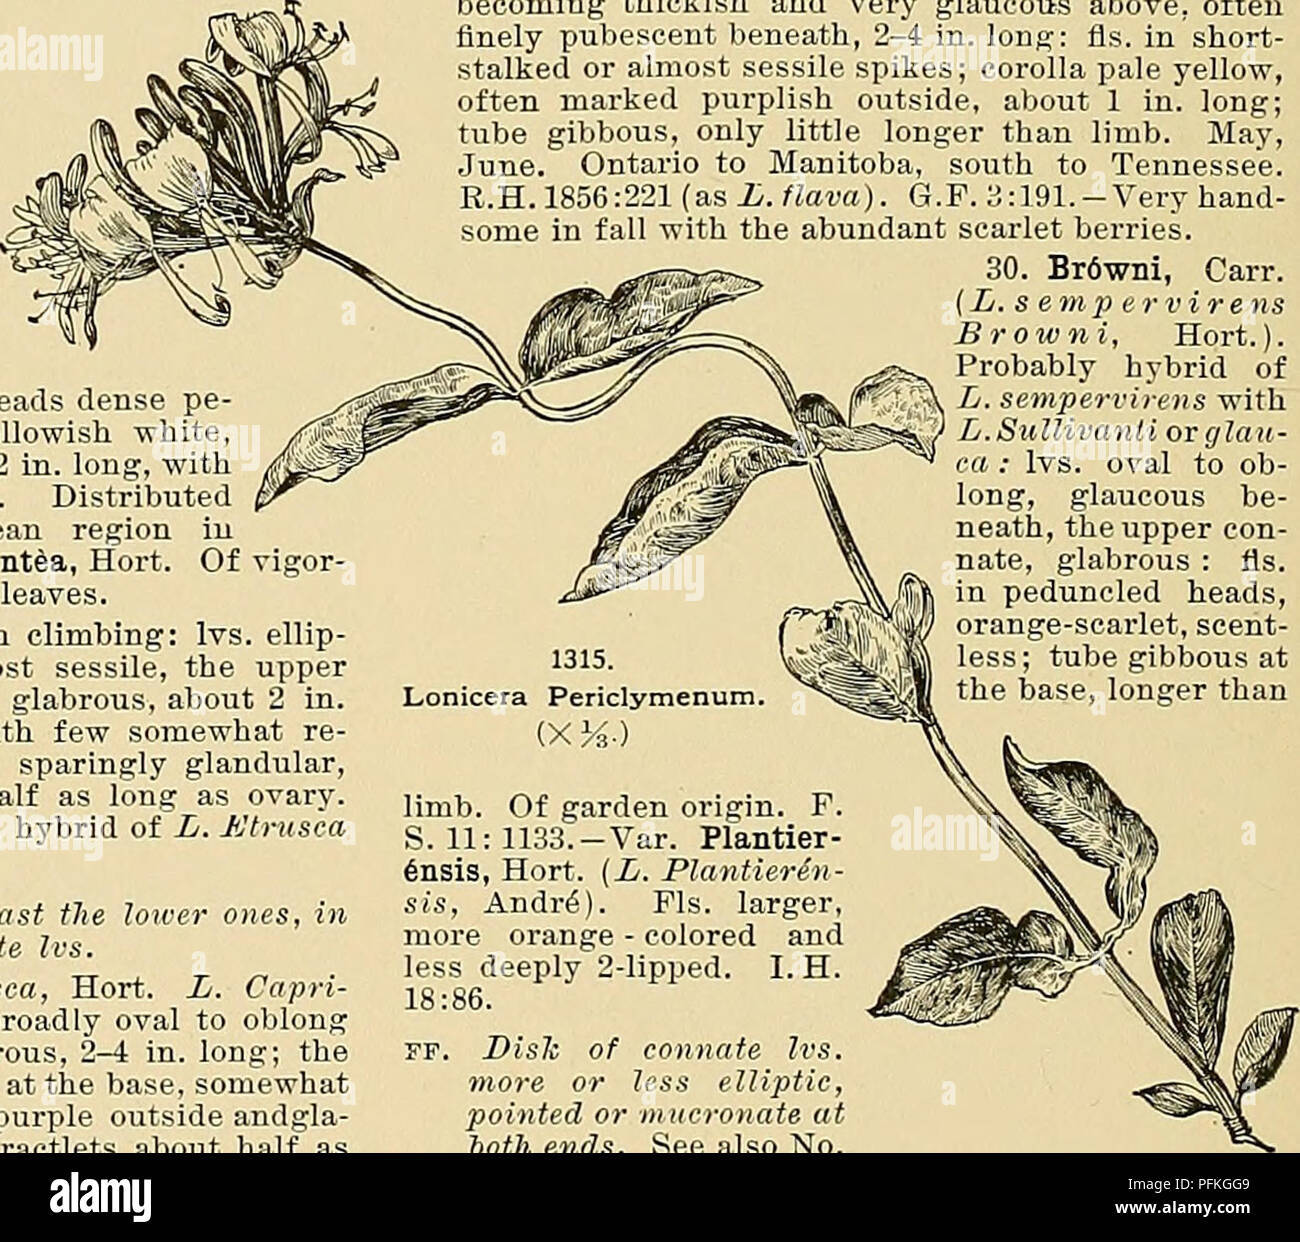 . Cyclopedia of American horticulture, comprising suggestions for cultivation of horticultural plants, descriptions of the species of fruits, vegetables, flowers, and ornamental plants sold in the United States and Canada, together with geographical and biographical sketches. Gardening. 942 LONICERA LONICERA 20. longiflora, DC. Climbing shrub, glabrou.?: Ivs. oblong-lanceolate, shining above, pale beneath, 2-2J^ in. long; fls. in short-peduncled pairs, sometimes crowded towards the end of branches; corolla &quot;(vhite, changing to yellow, fragrant, 3-4 in. long, with very slender tube: bracts Stock Photo